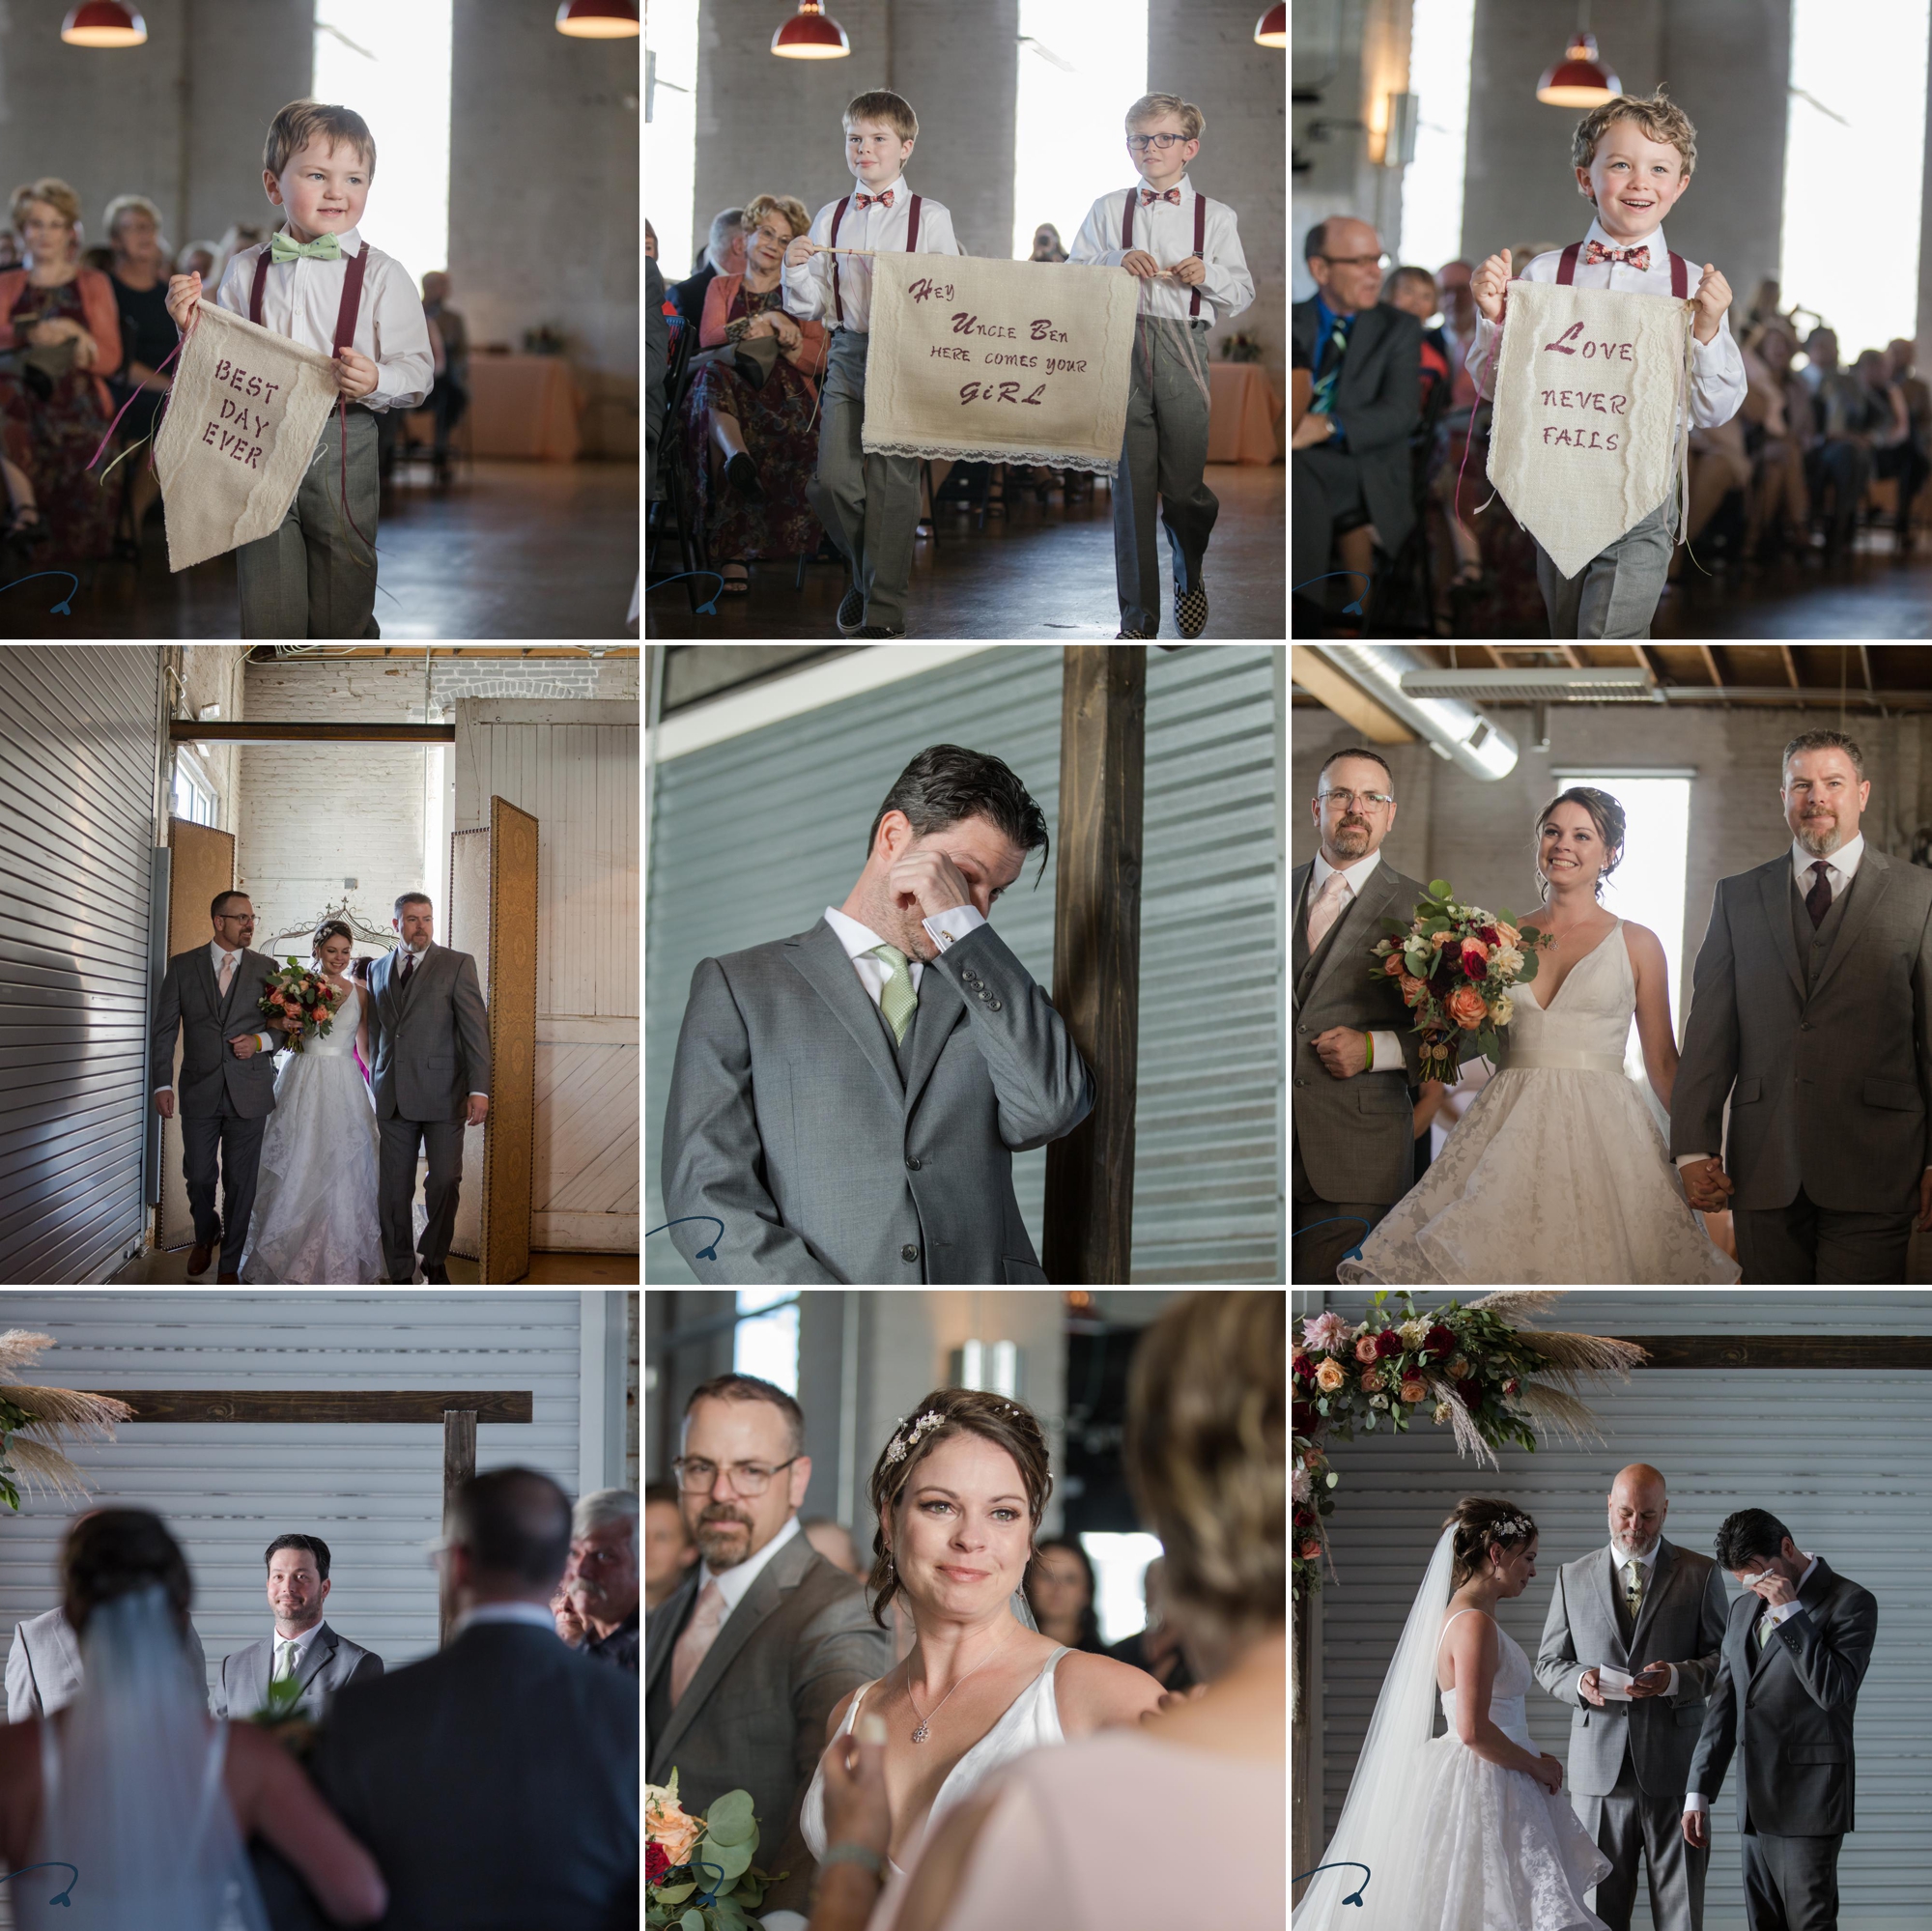 Contemporary wedding ceremony at the Studios at Overland crossing